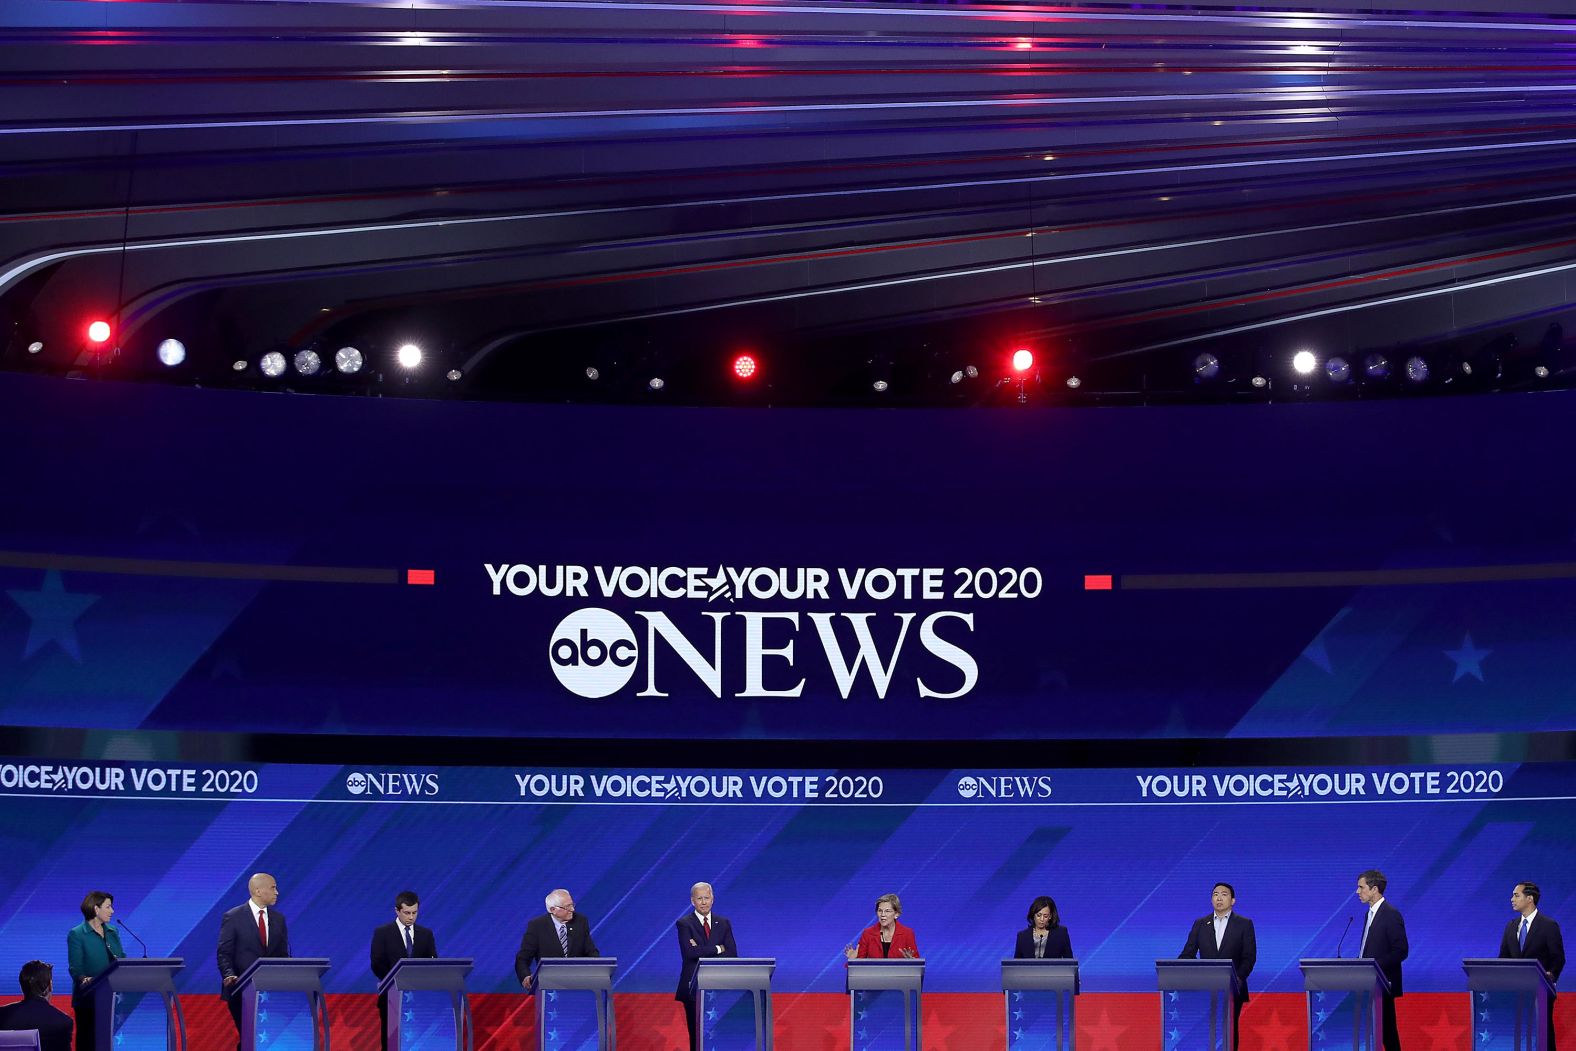 This is the third Democratic debate of the campaign season. The first two were held in Miami and Detroit.